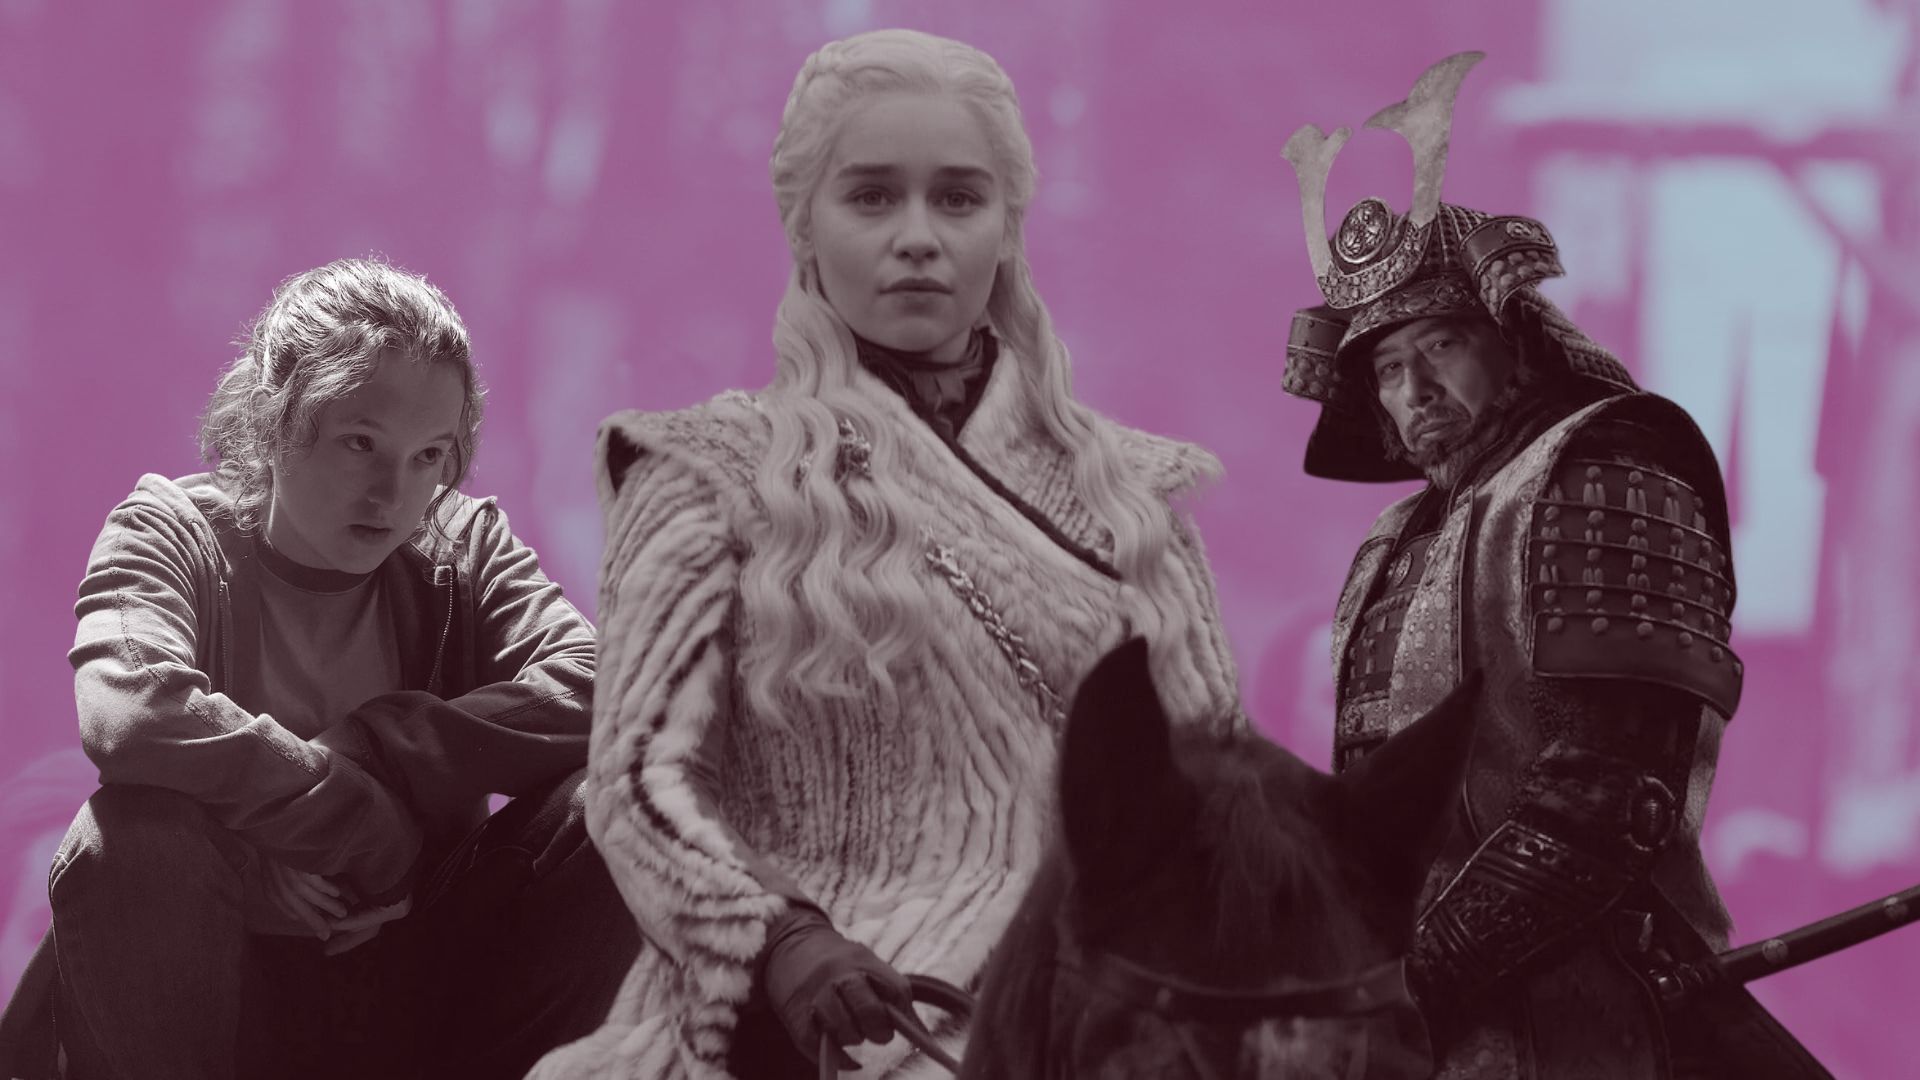 What Will the Next Game of Thrones Look Like?